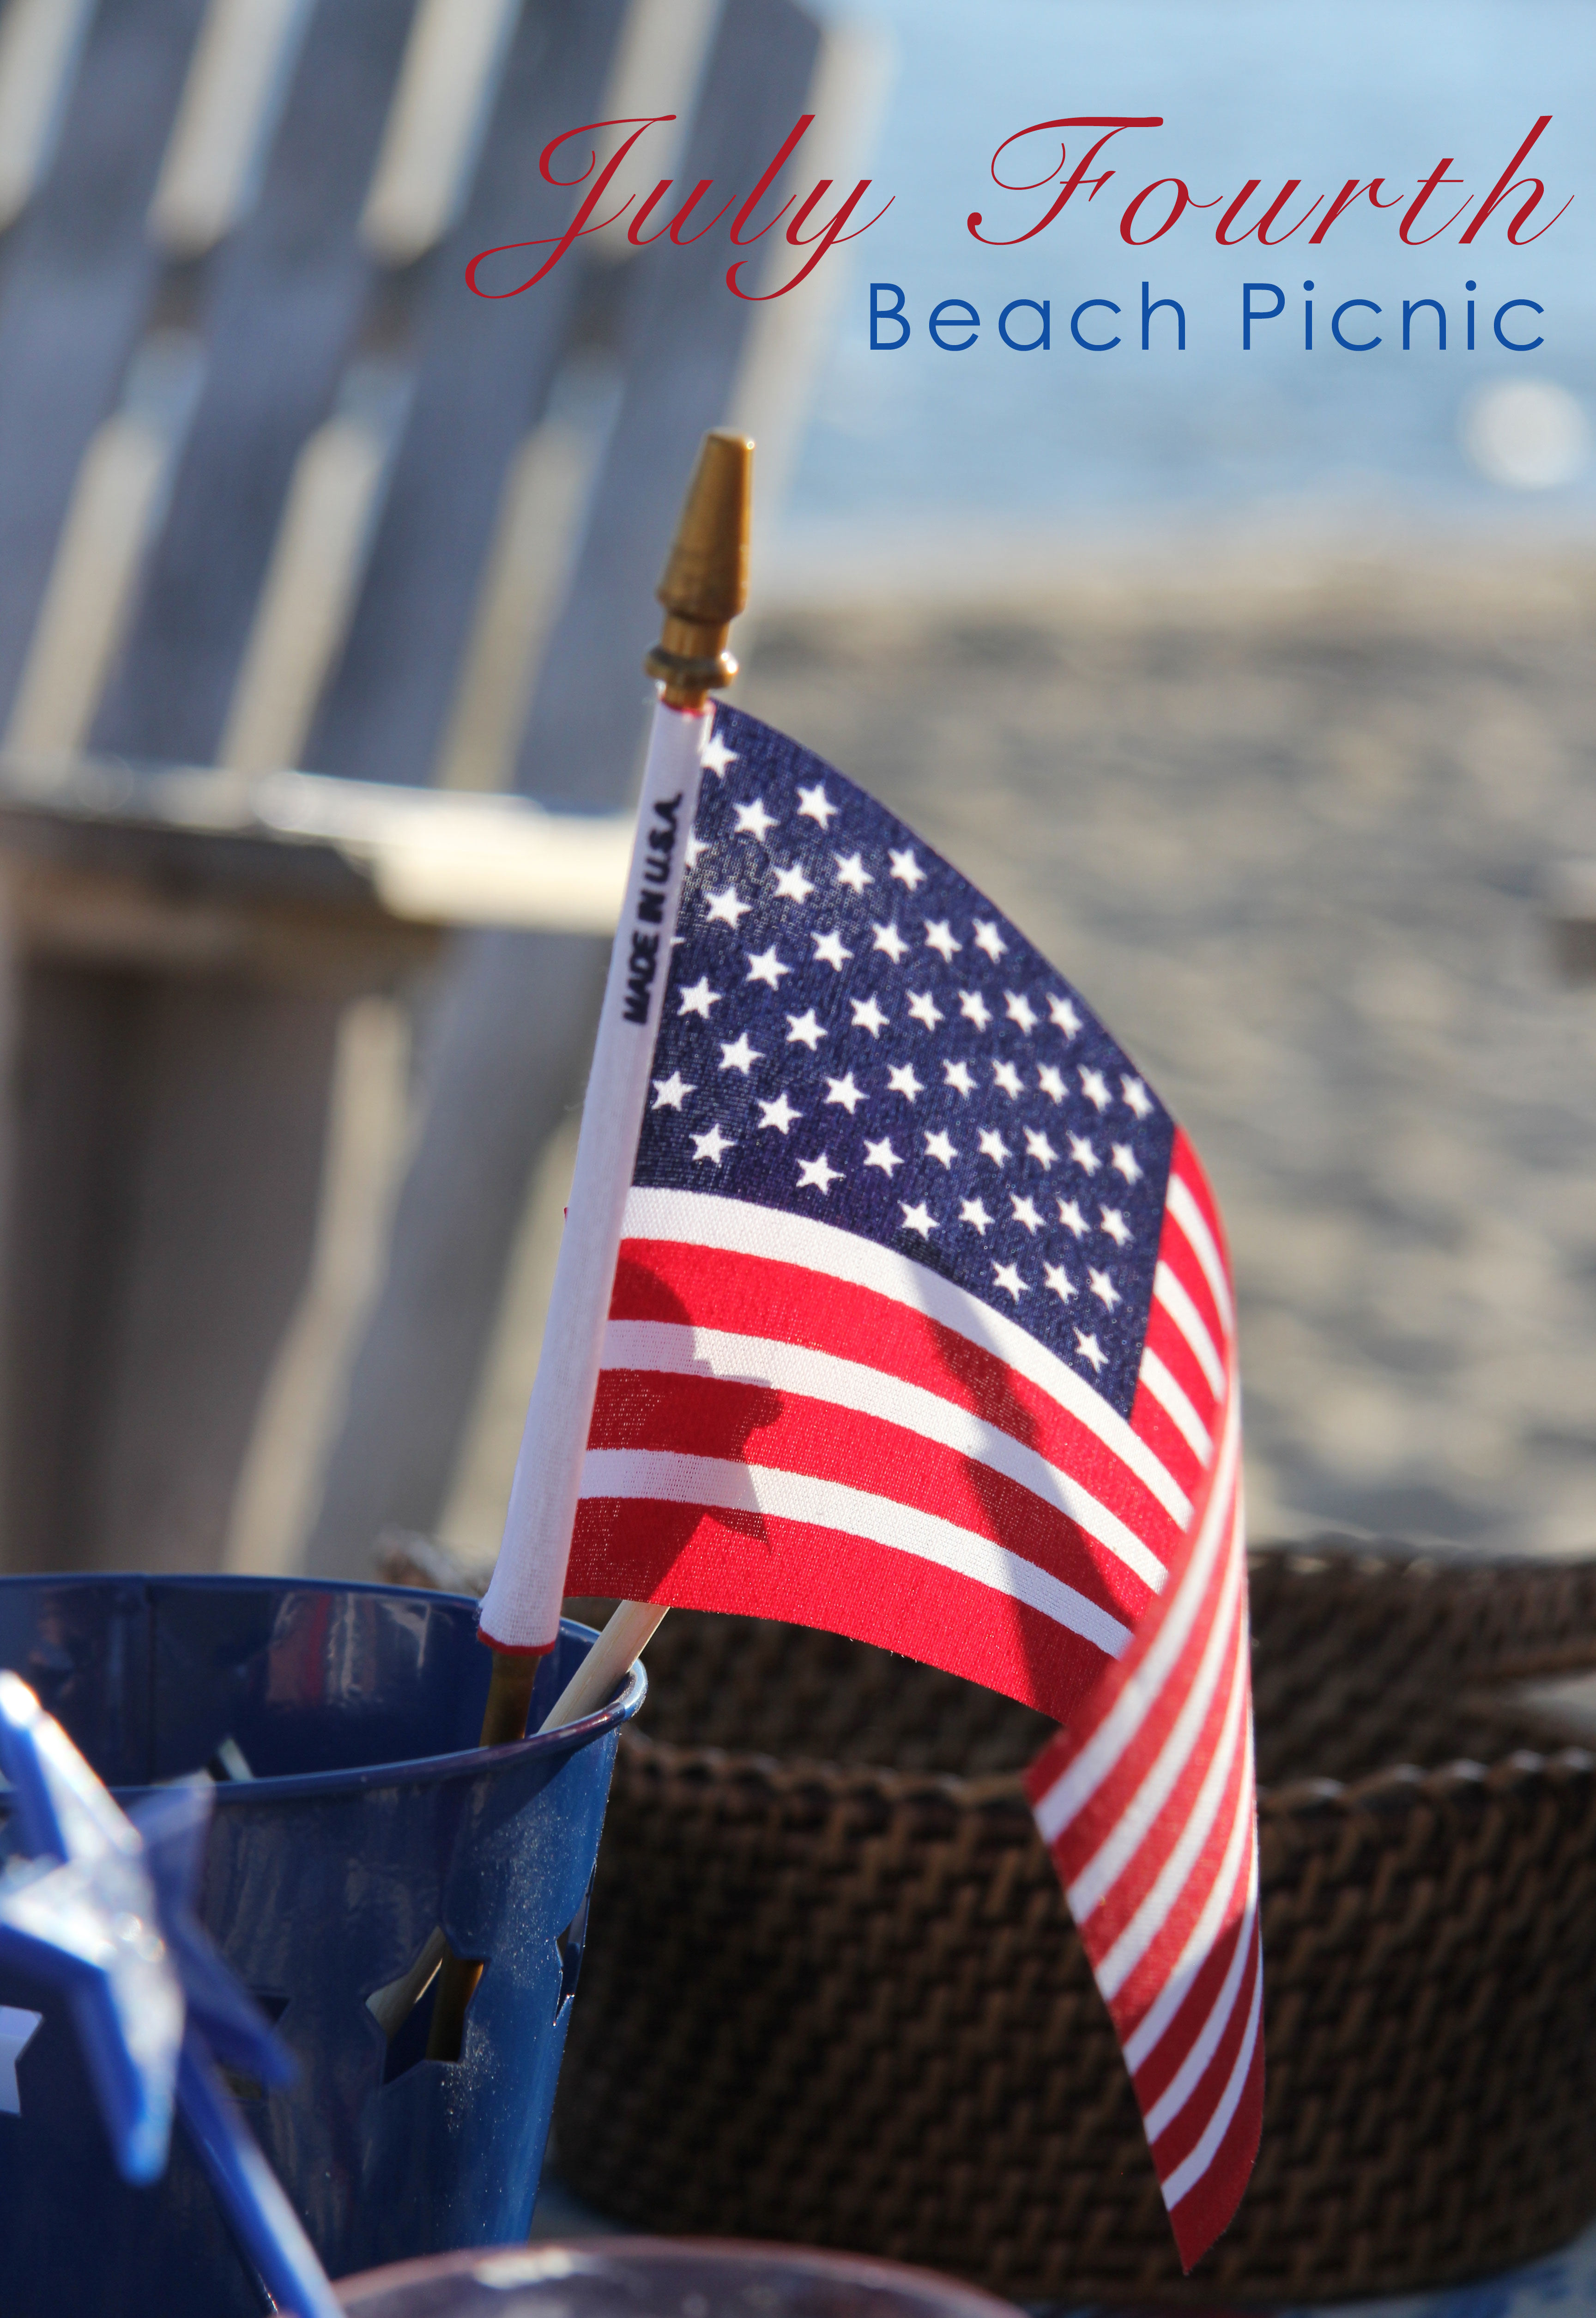 Plan a patriotic Beach Picnic with this delicious menu with easy to make recipes and a FREE downloadable packing list.